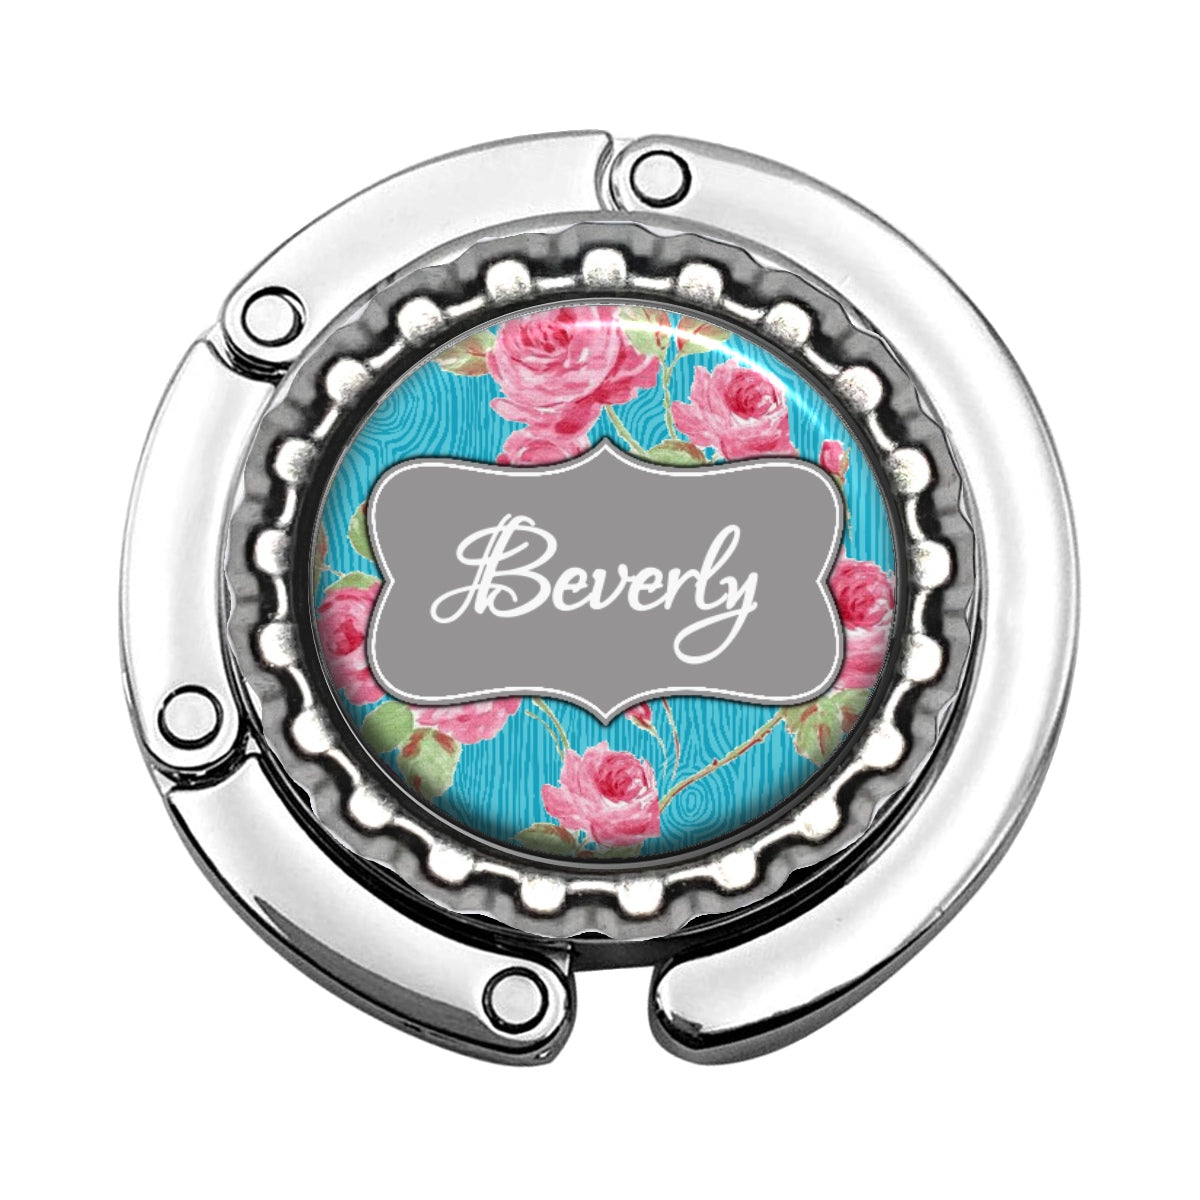 a bottle opener with a picture of roses on it